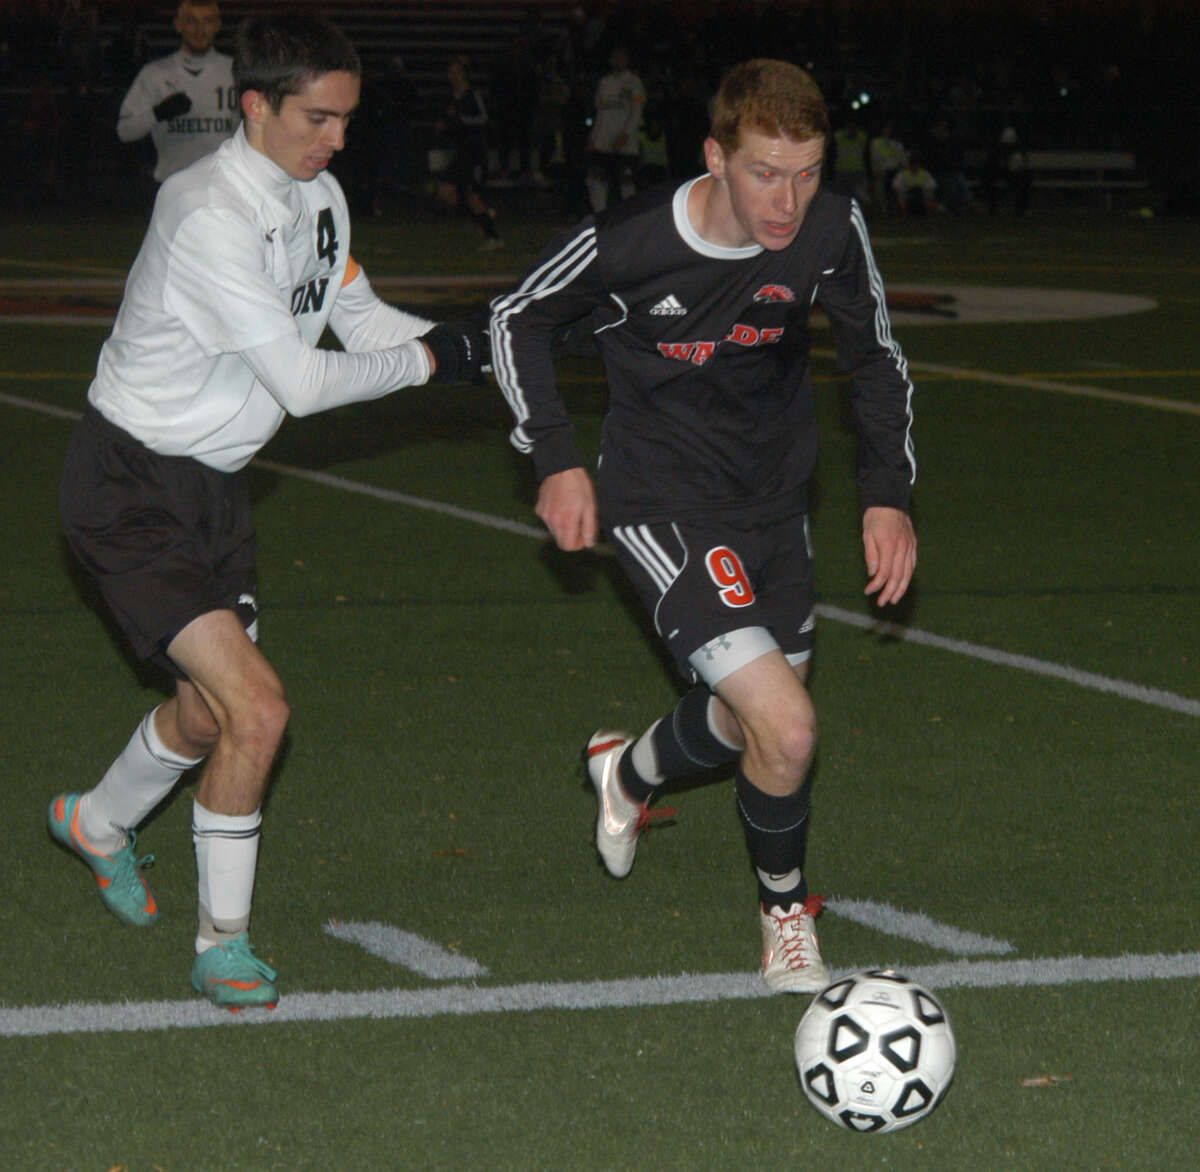 Shelton's John Hunter (4) chases Fairfield Warde's Peter Stymacks (9) on Tuesday, Nov. 5 in the Mustangs' 1-0 win at Shelton in a CIAC Class LL boys soccer state tournament first-round match.